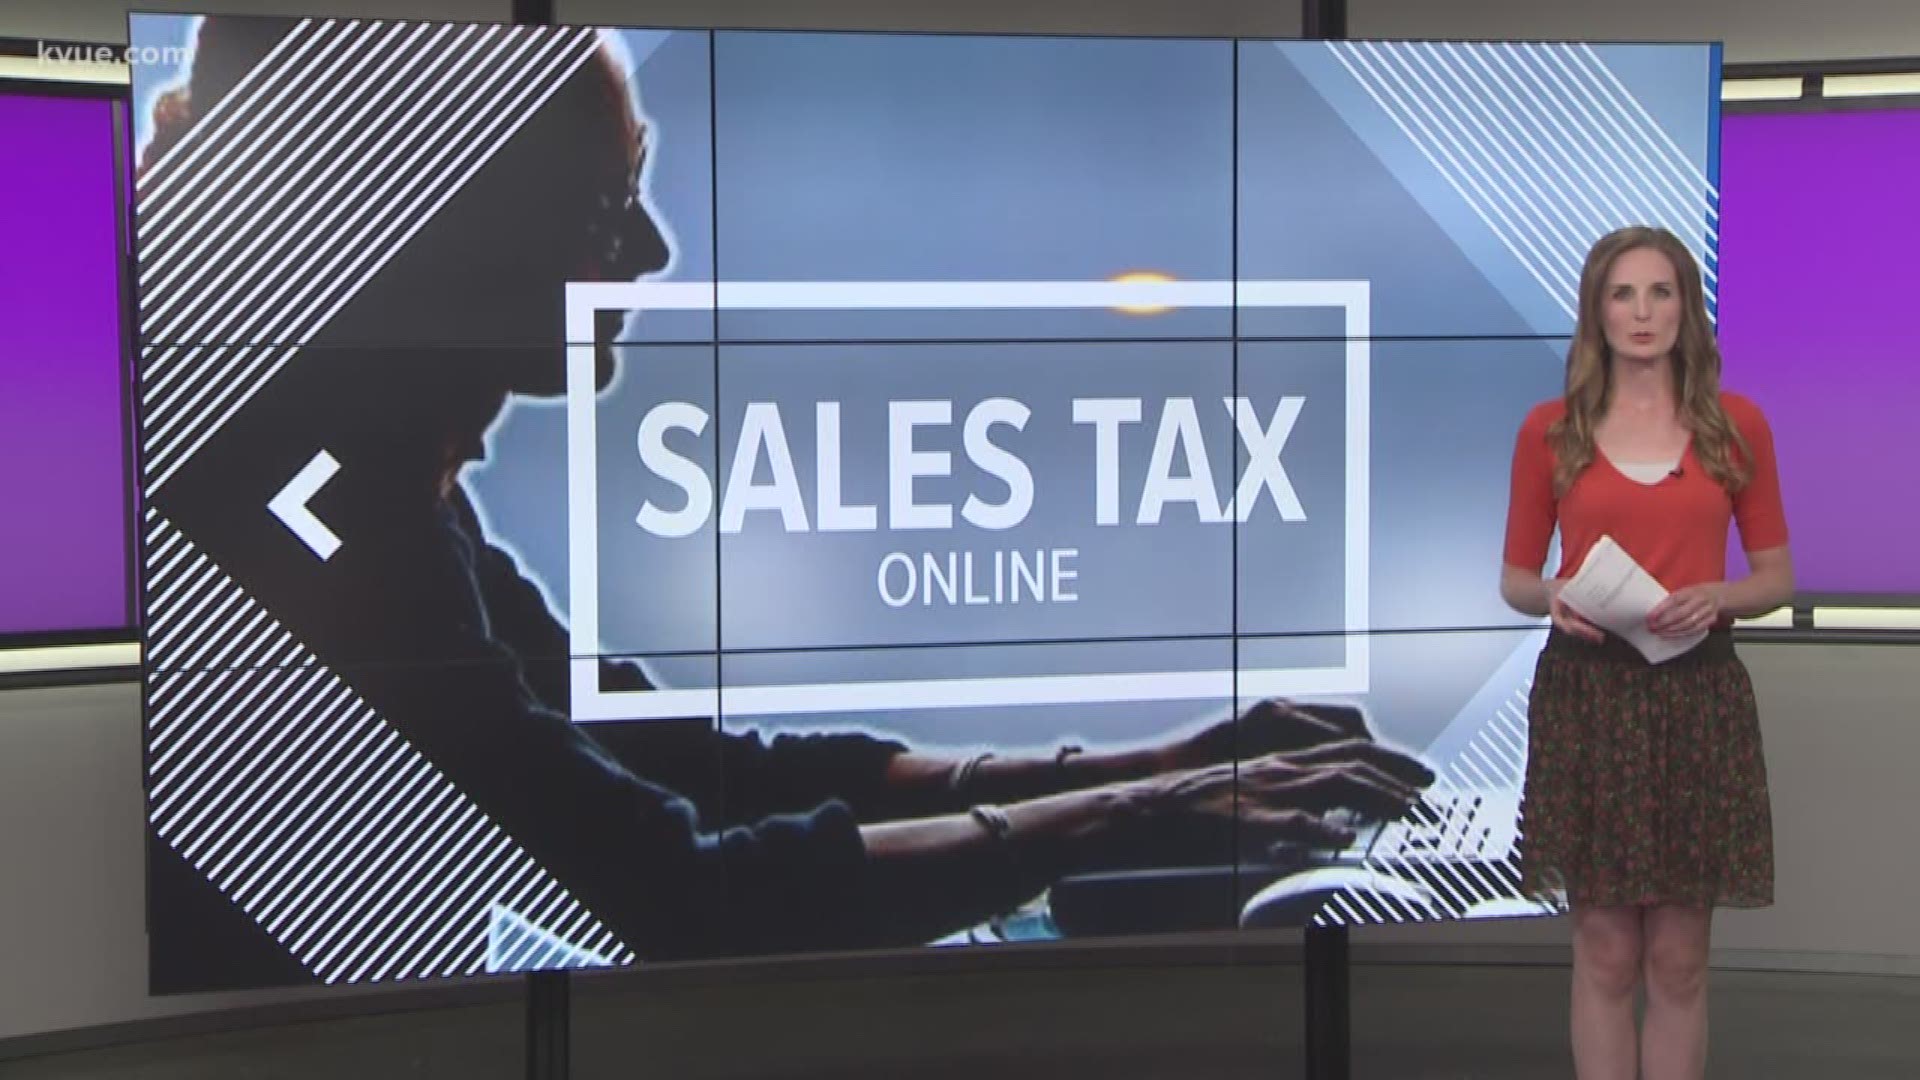 With a lot of us buying online from our phone or computer --- this sales tax could impact almost everyone.